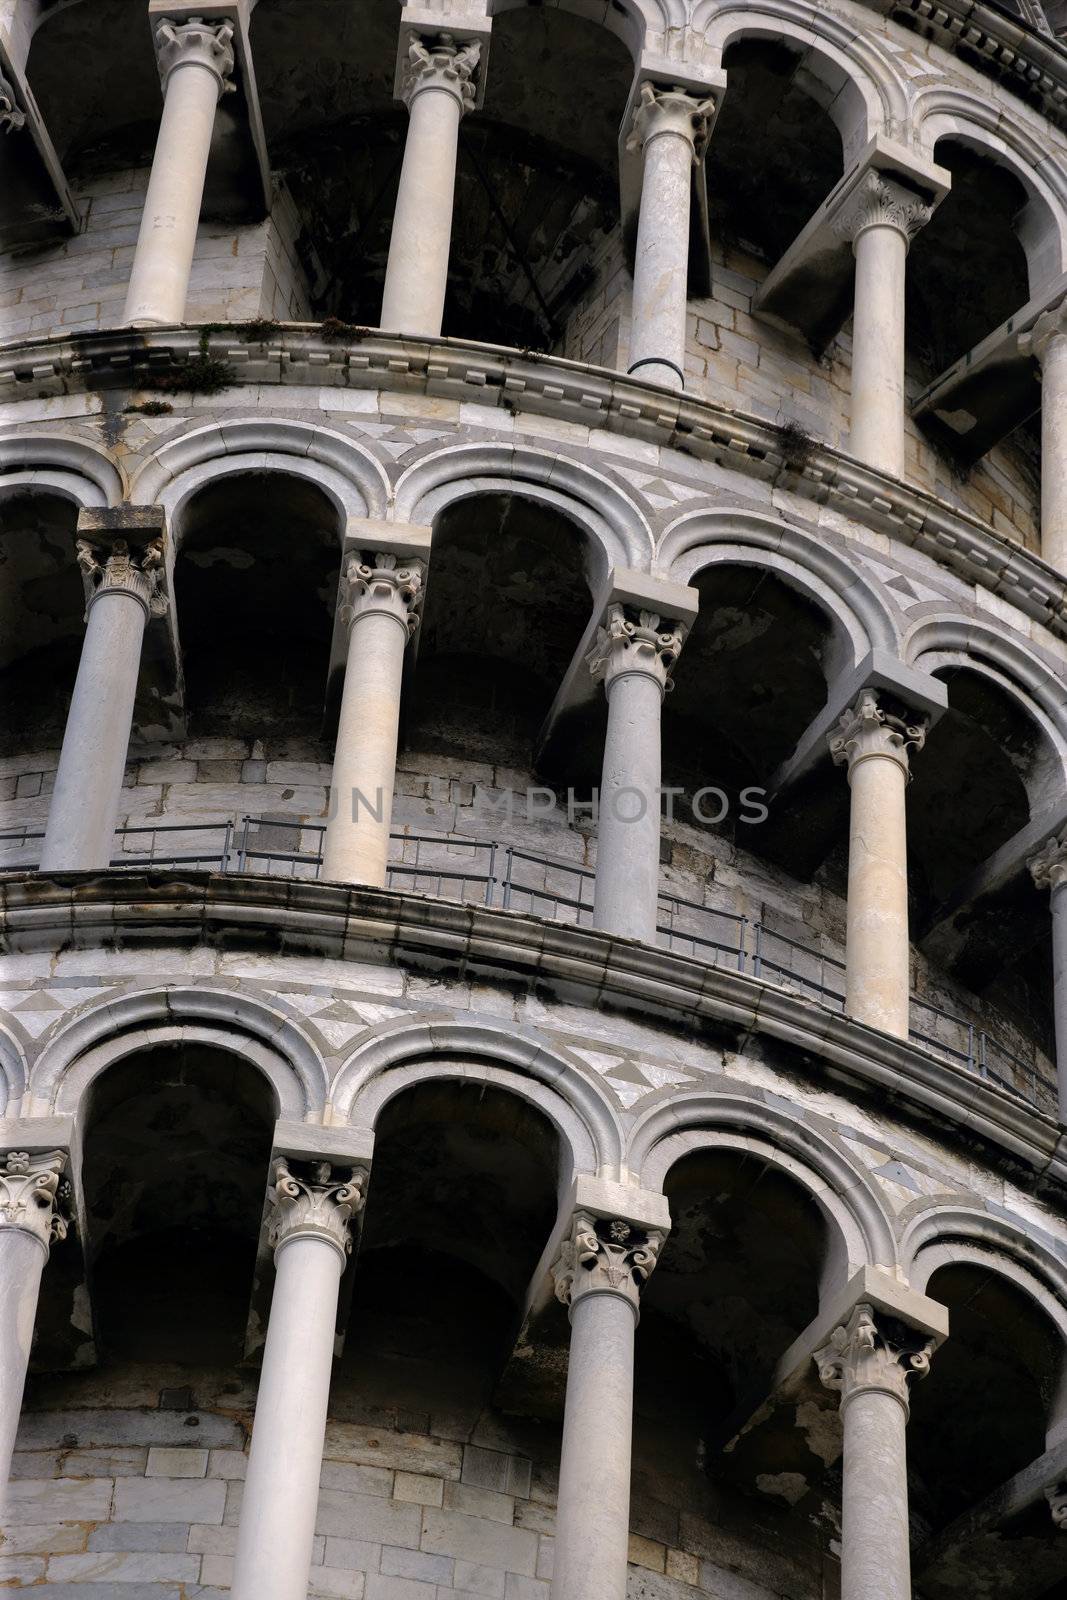 Close up of the arches from the Leaning Tower of Pisa.
